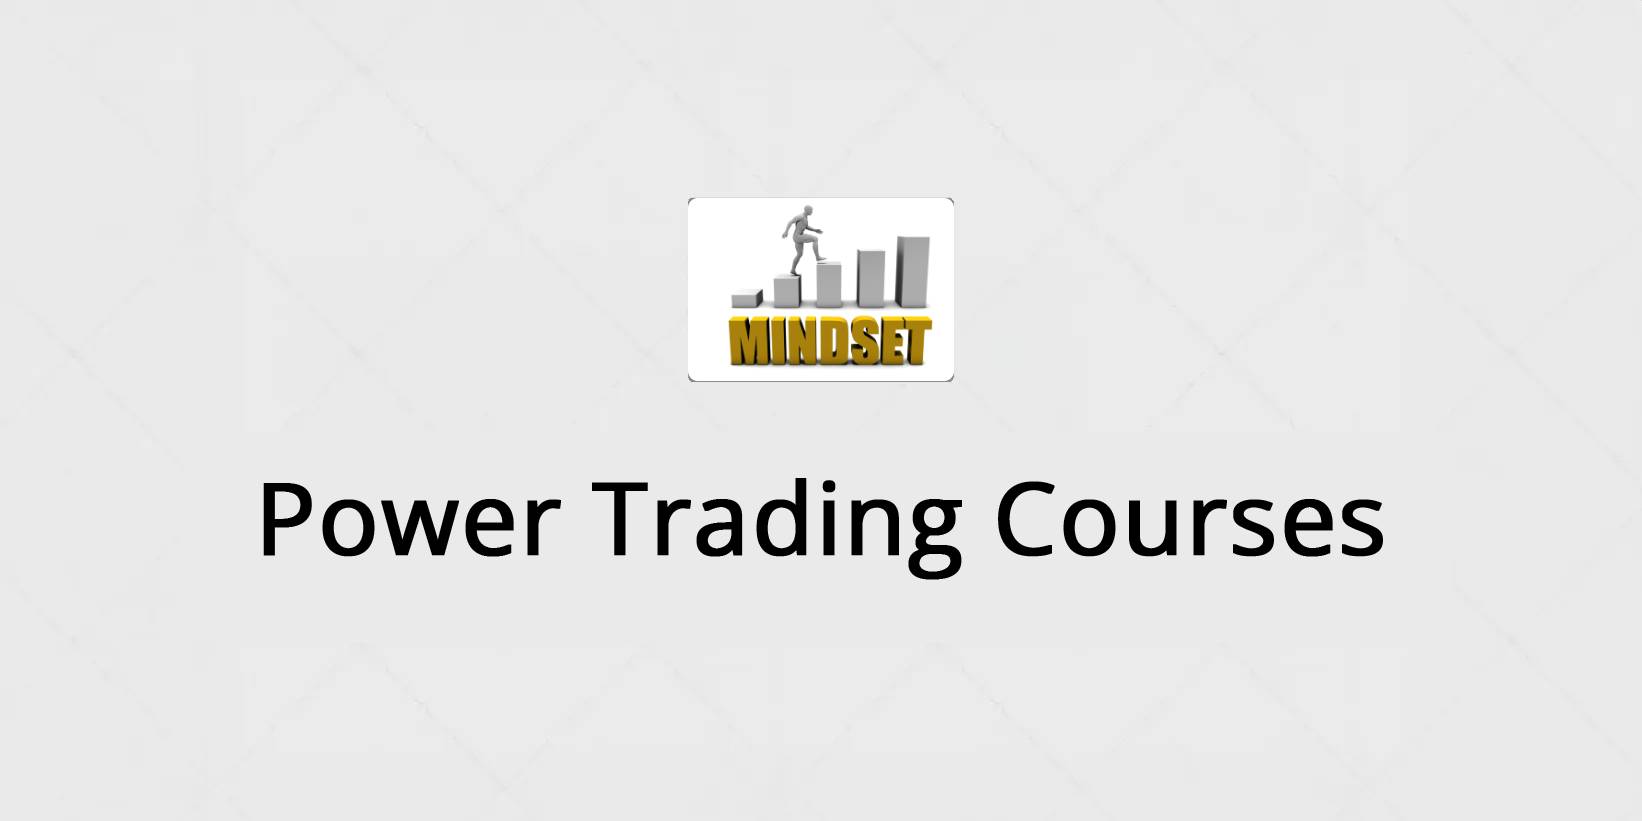 A picture of the power trading course logo.